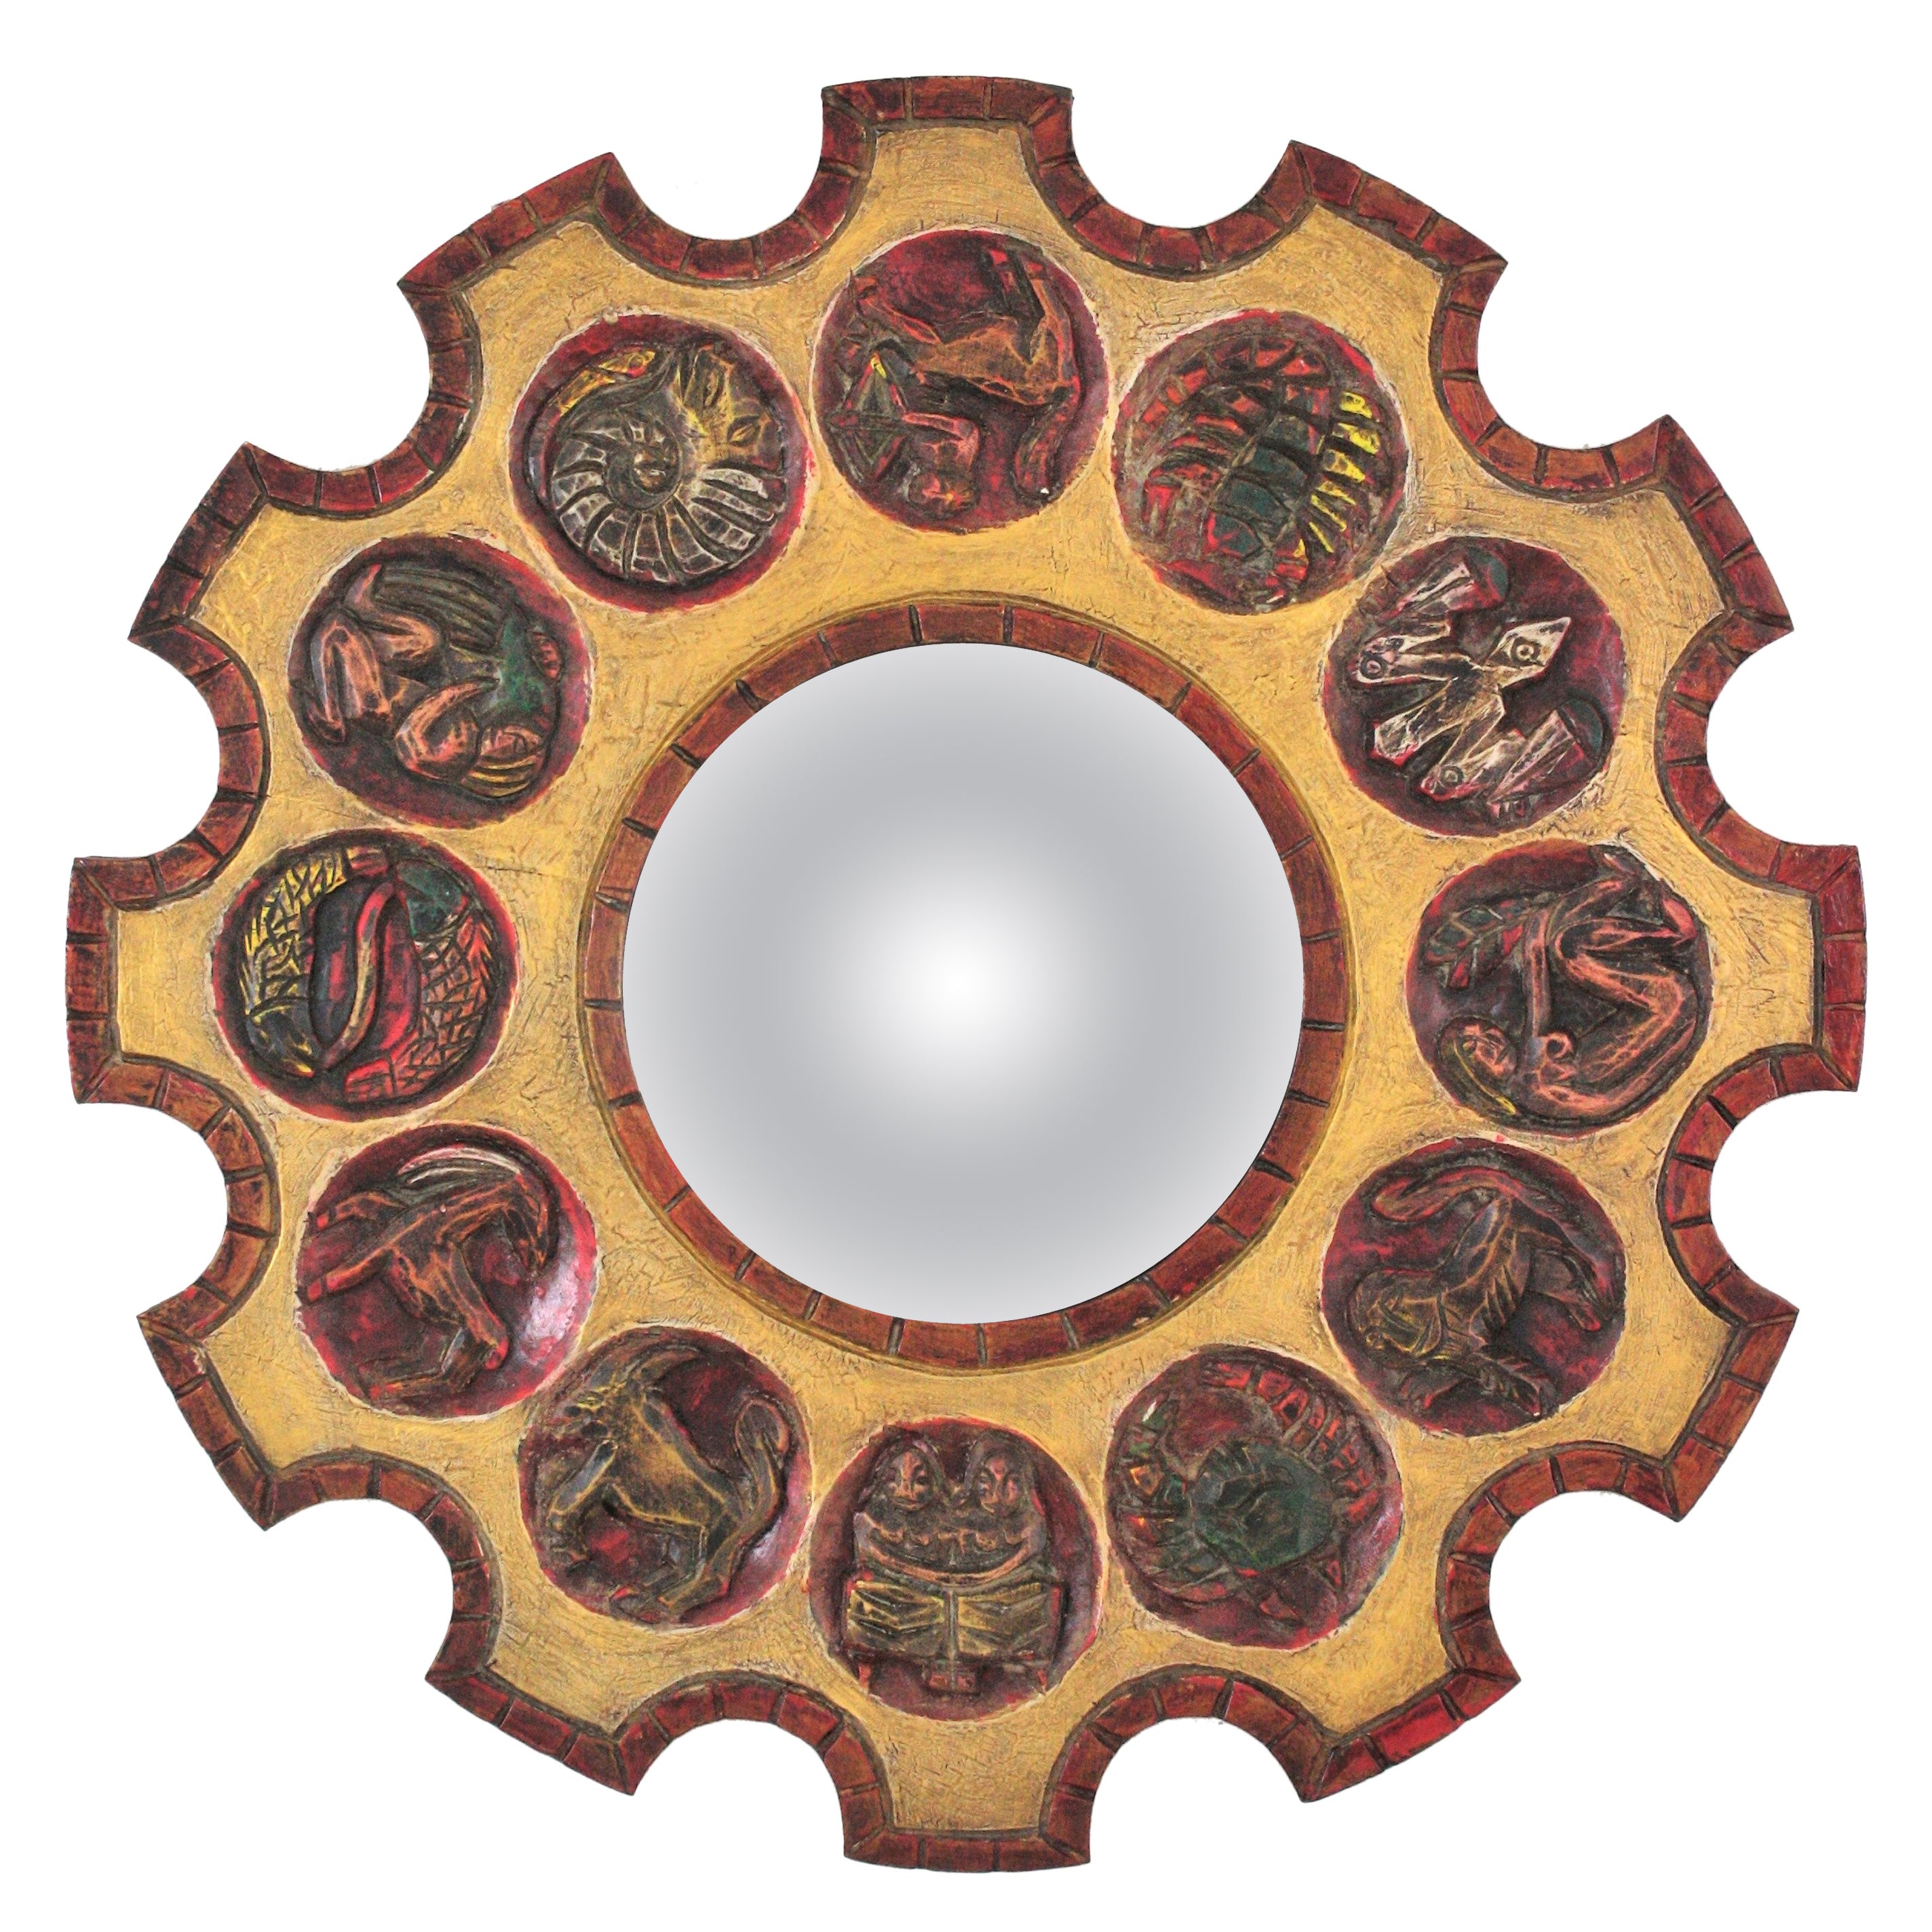 Spanish Zodiac Sunburst Mirror with Red Giltwood Carved Frame, 1950s For Sale